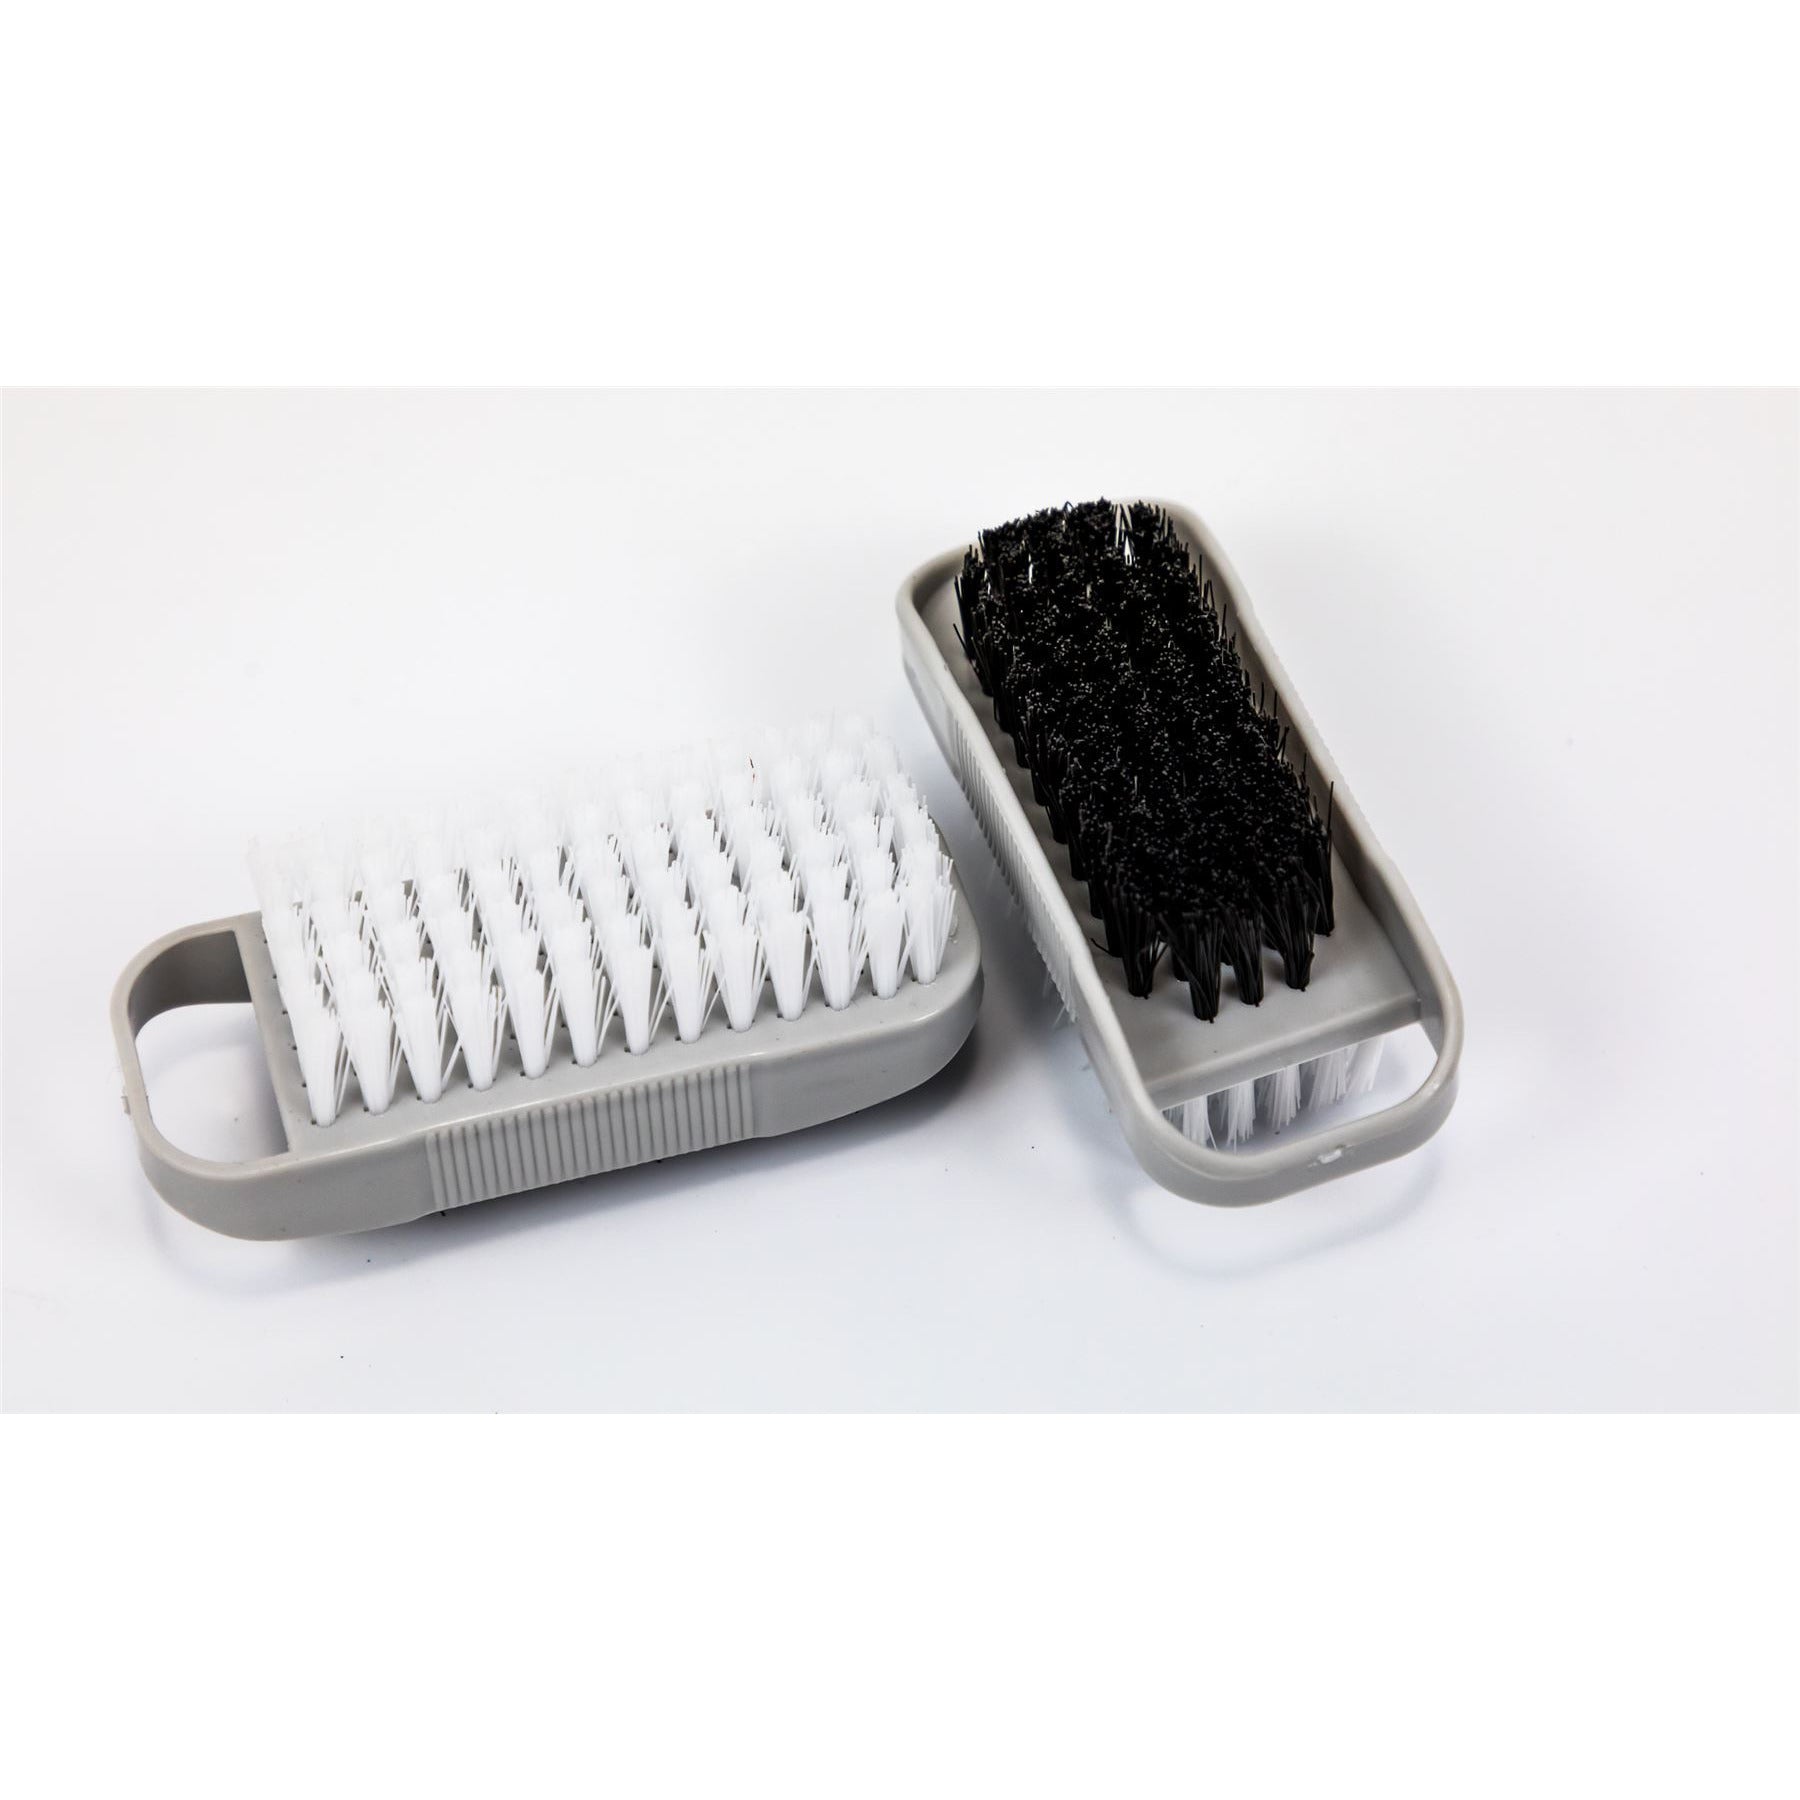 Pack of 2 Double Sided Plastic Nail Cleaning Brushes - The Dustpan and Brush Store